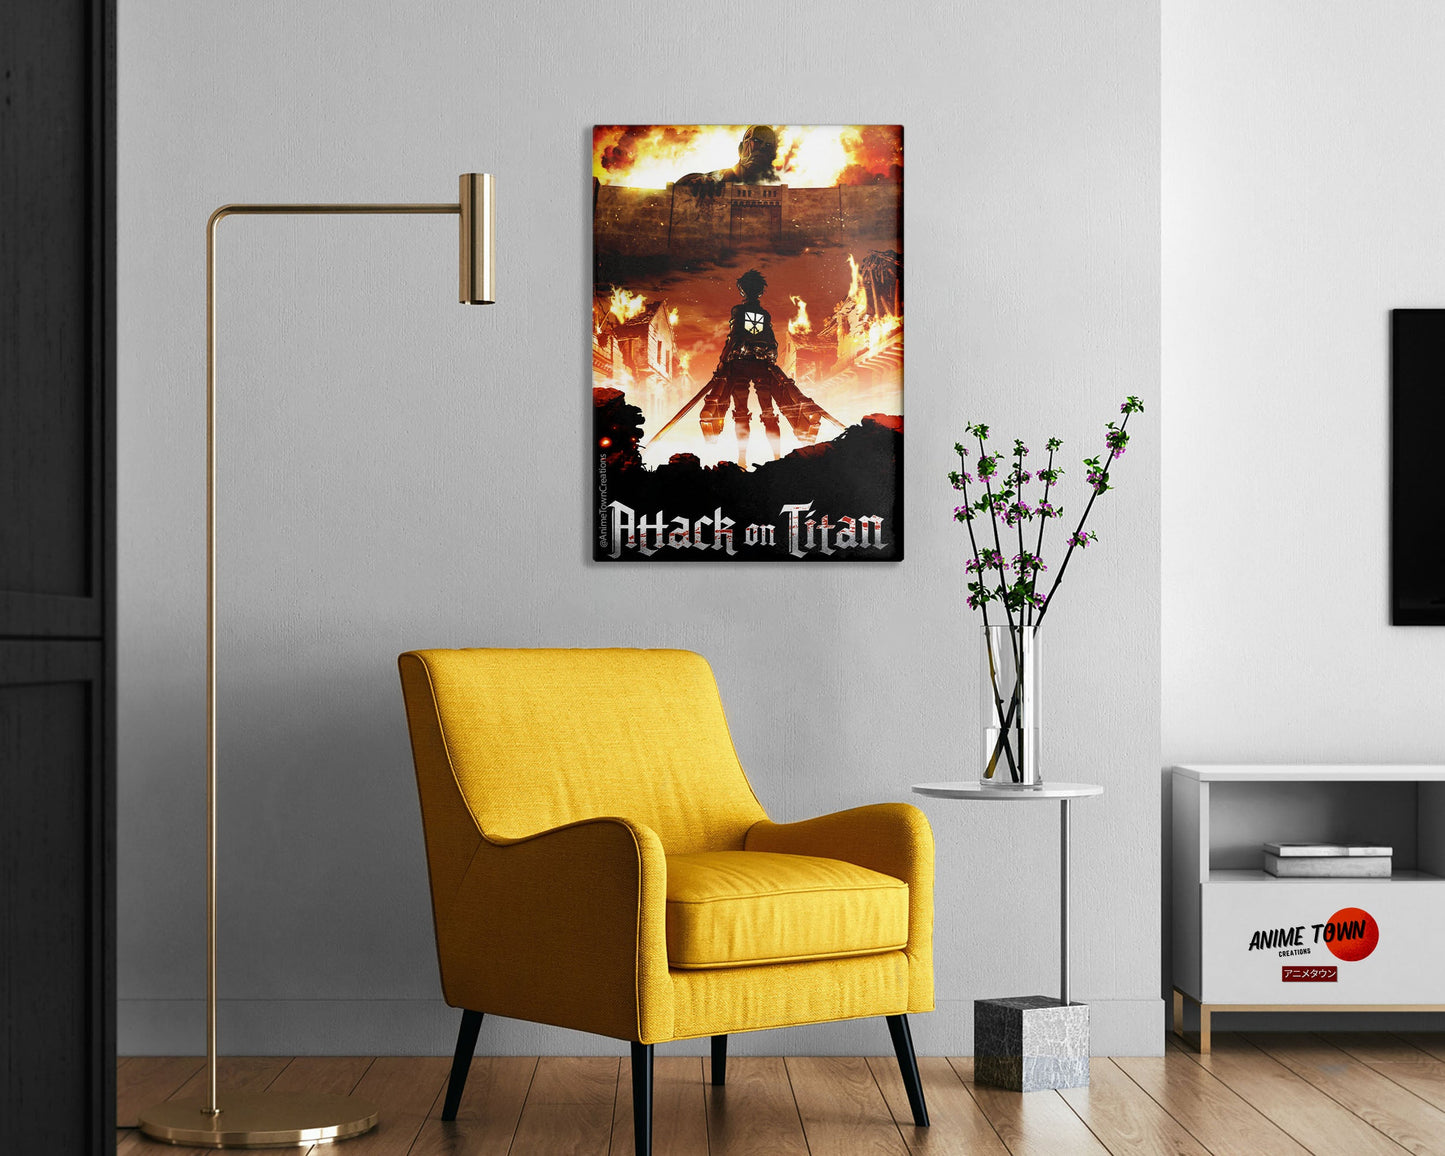 Anime Town Creations Metal Poster Attack on Titan Wall 24" x 36" Home Goods - Anime Attack on Titan Metal Poster